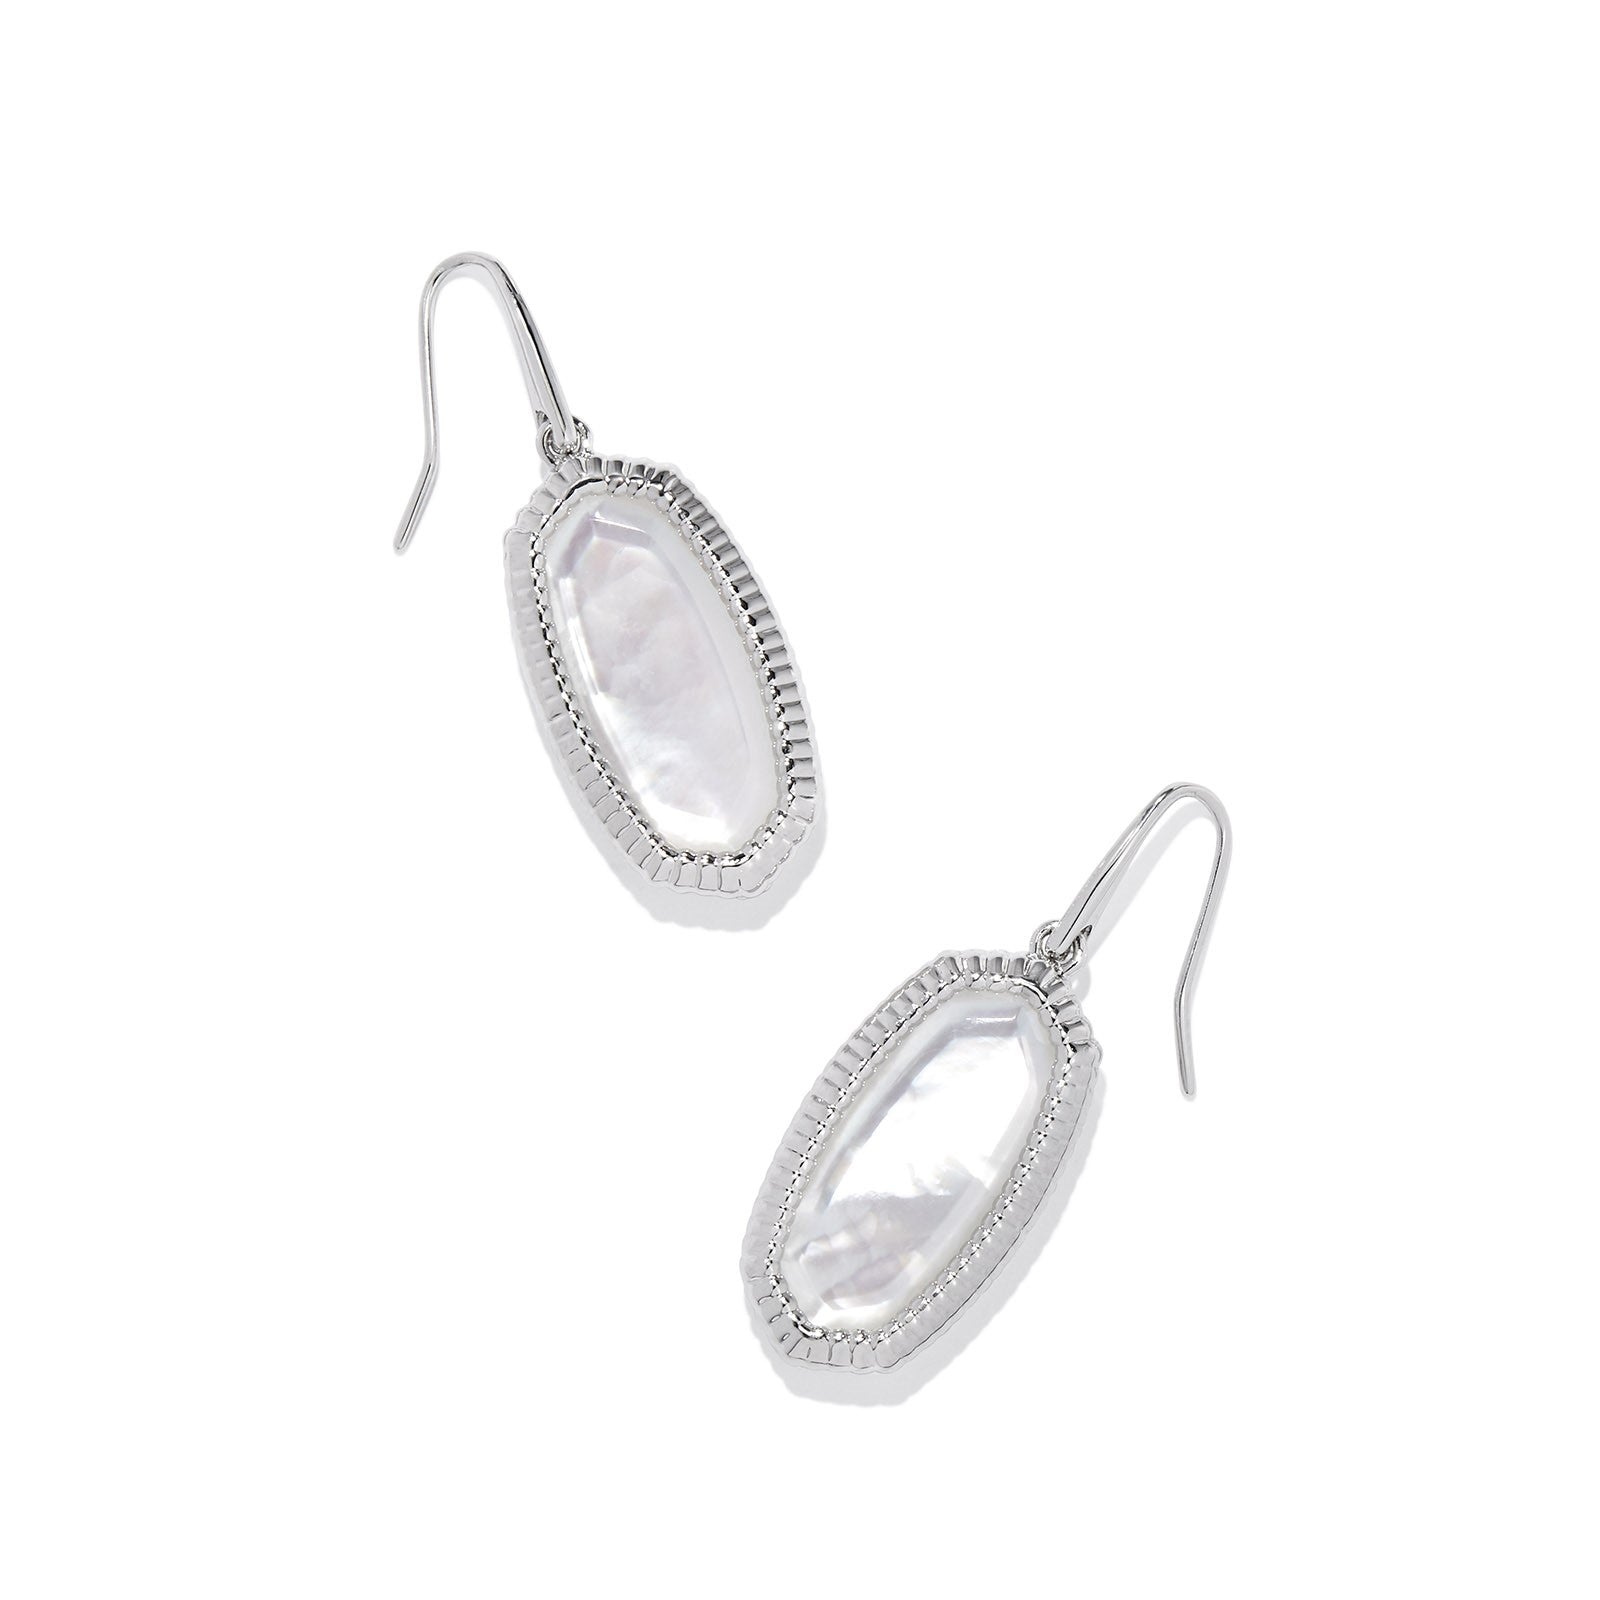 Kendra Scott | Dani Silver Ridge Frame Drop Earrings in Ivory Mother-Of-Pearl - Giddy Up Glamour Boutique